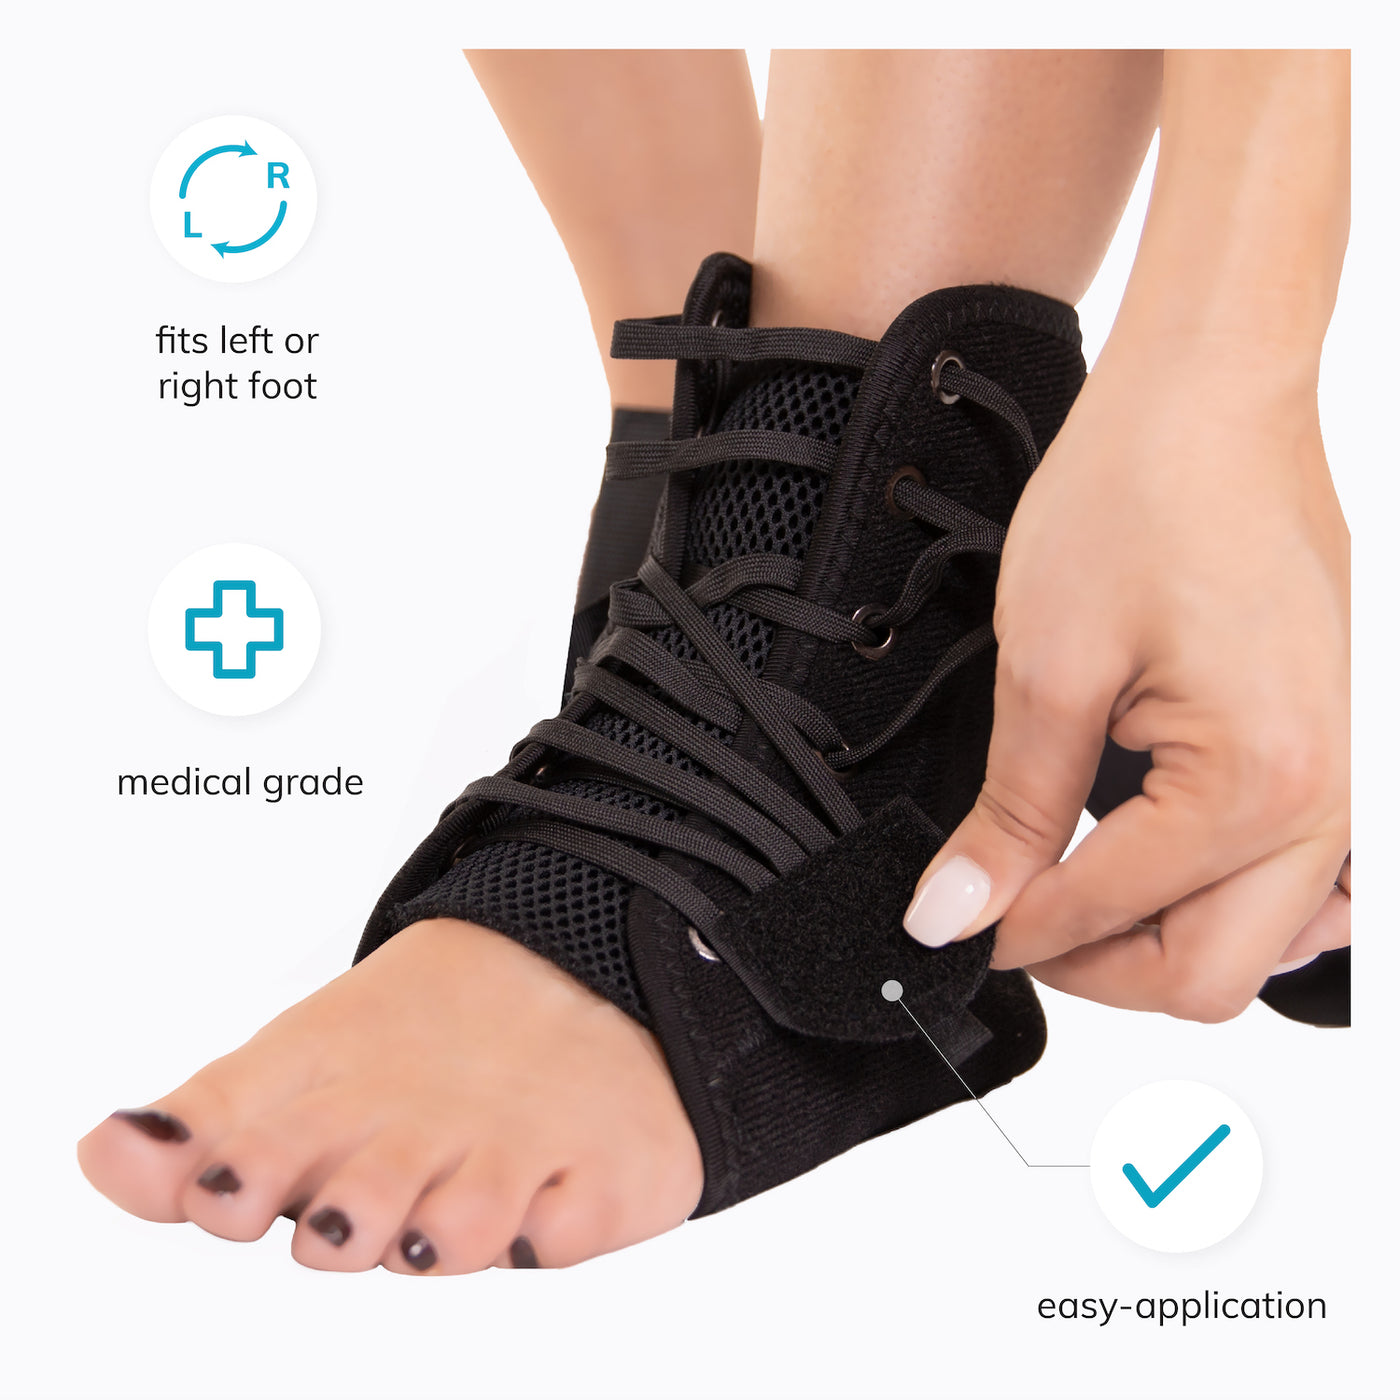 Our lace-up ankle brace has a speed lace cinching system making the ankle wrap quick to put on